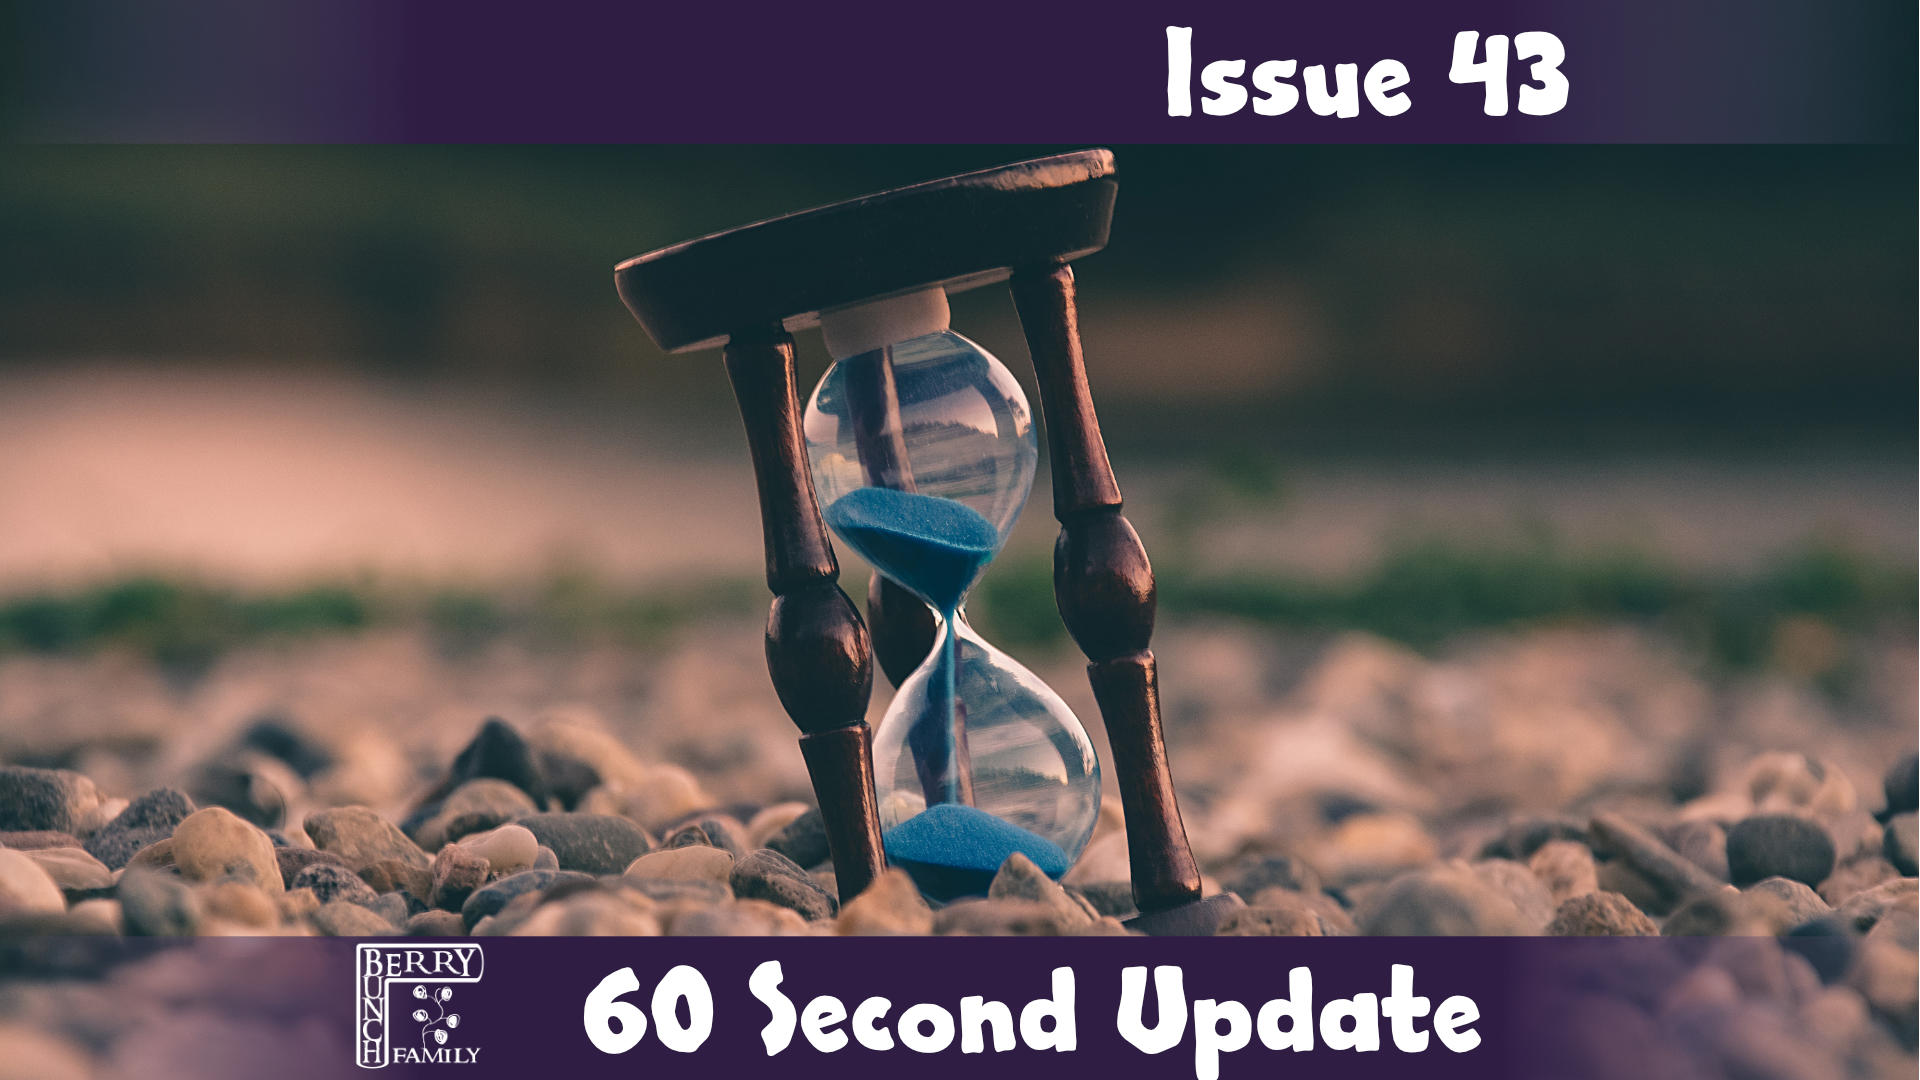 60 Second Update, Issue 43